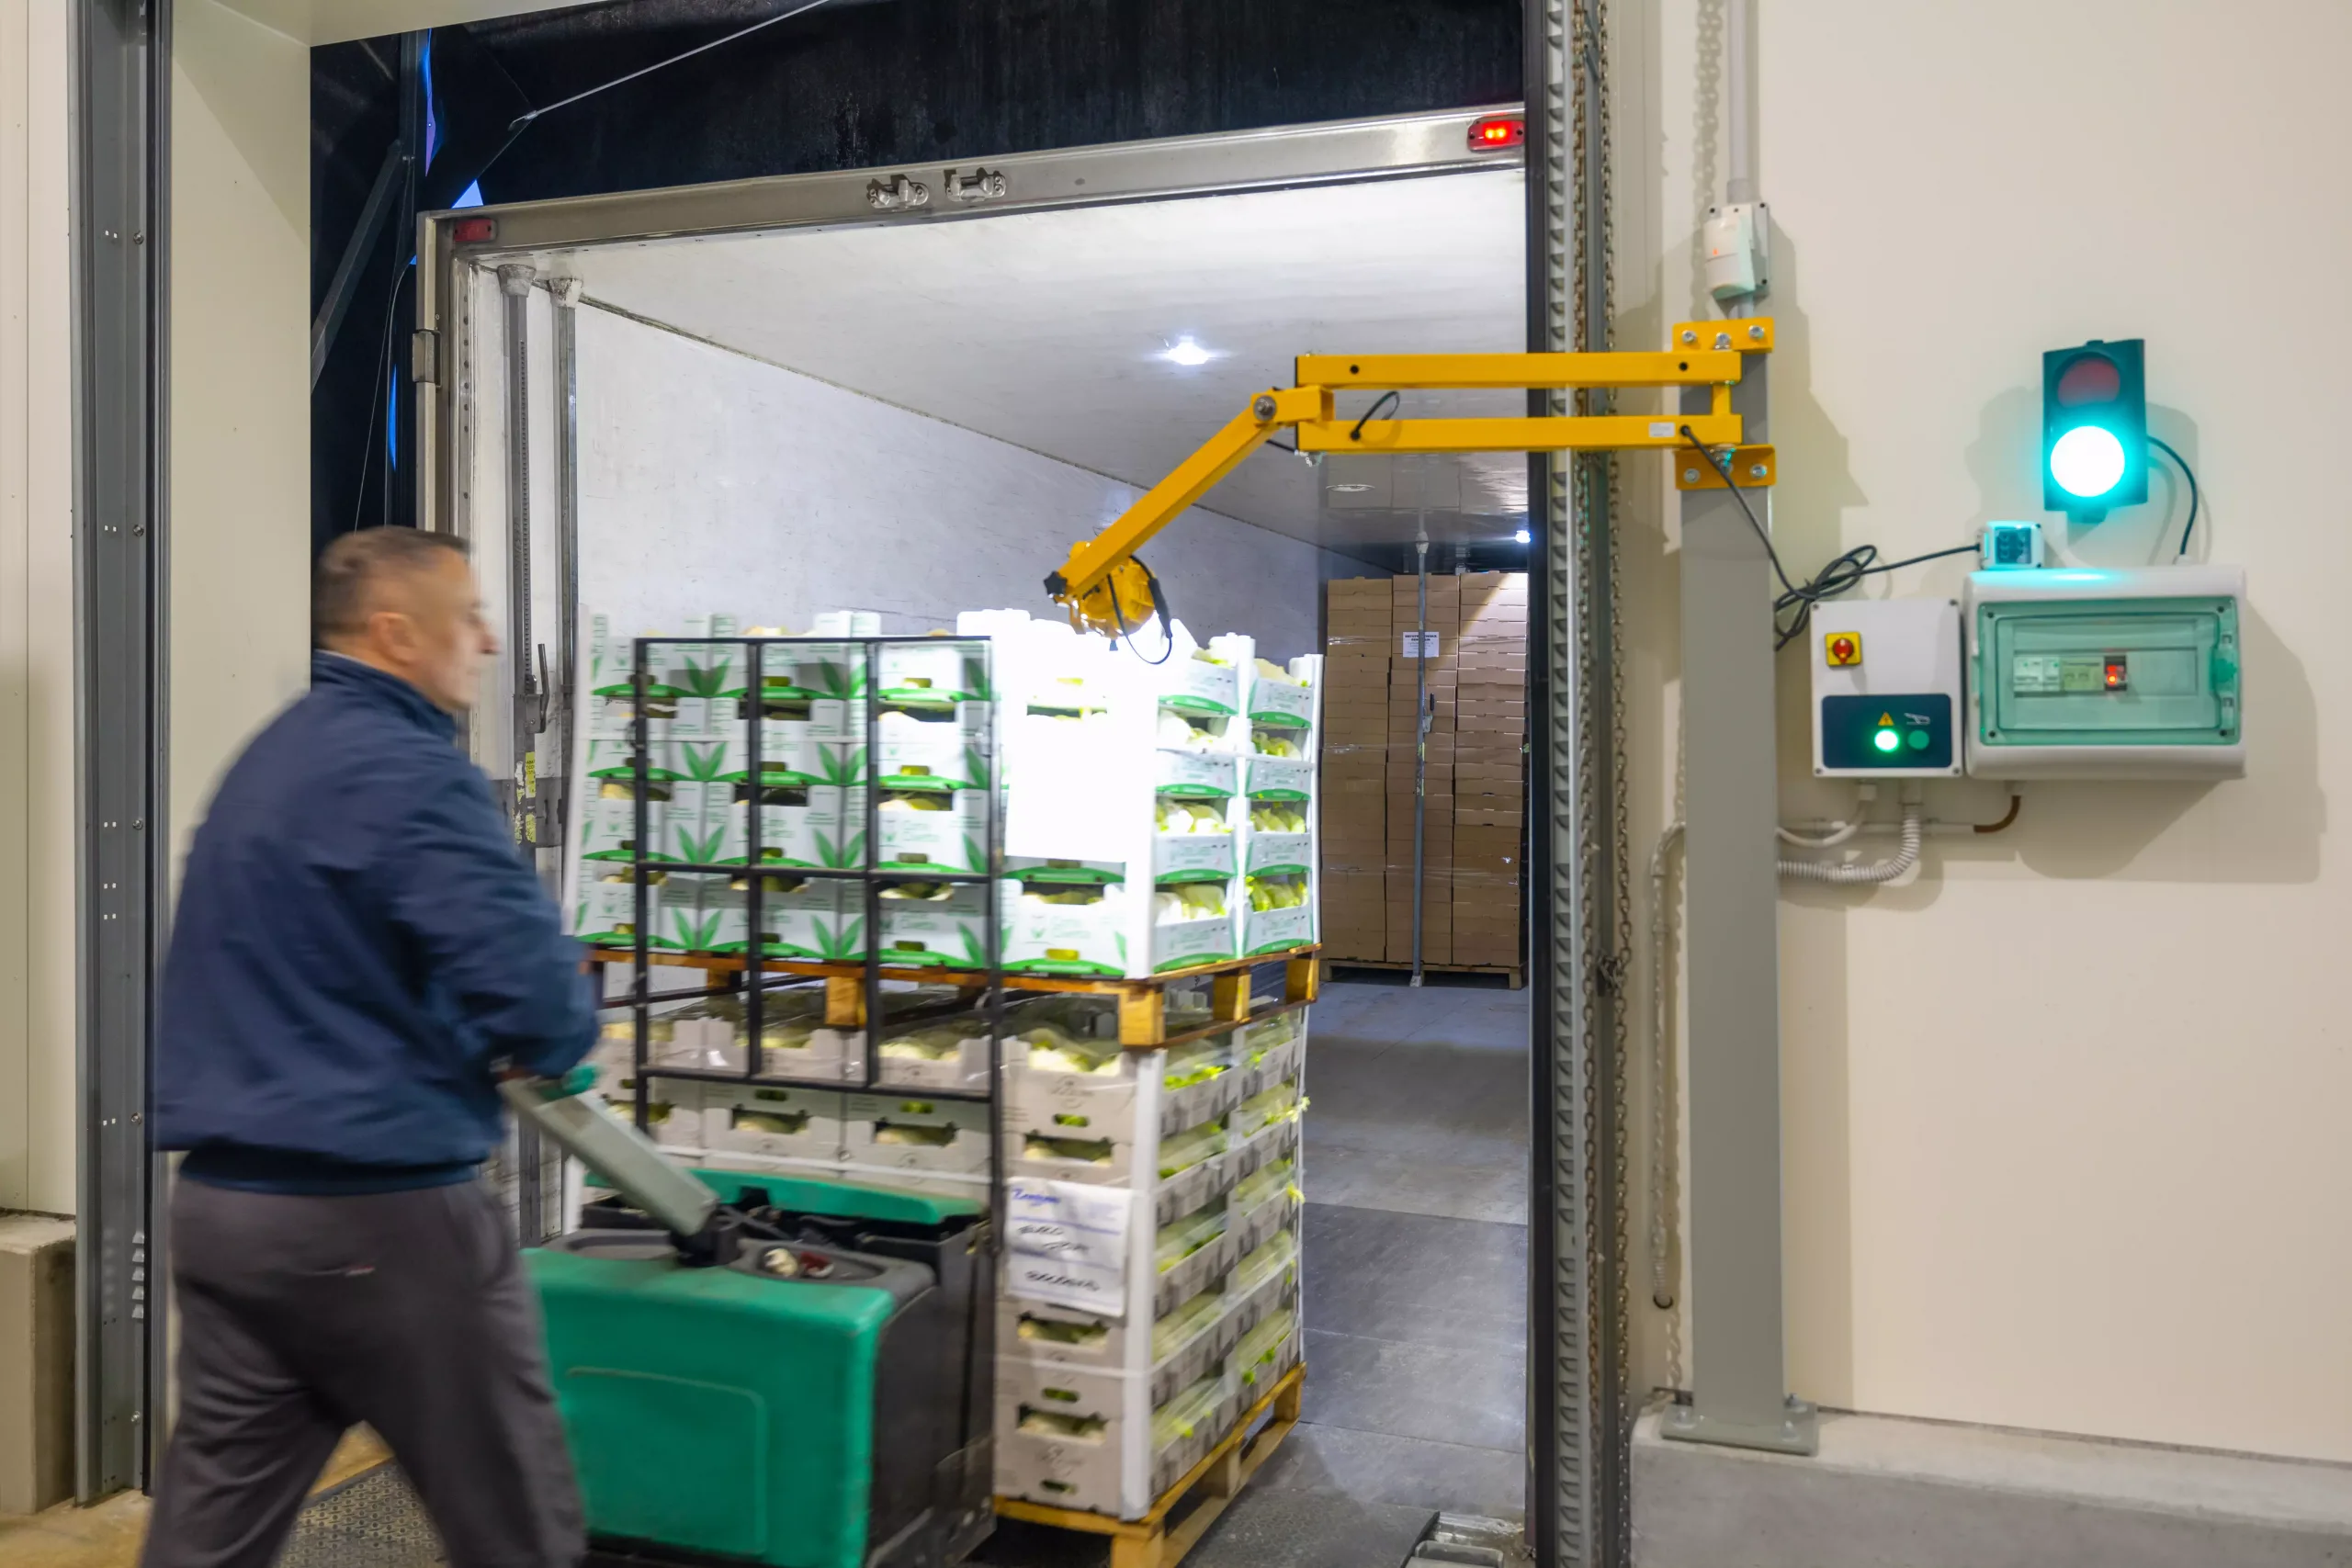 lighting and traffic lights for loading bays